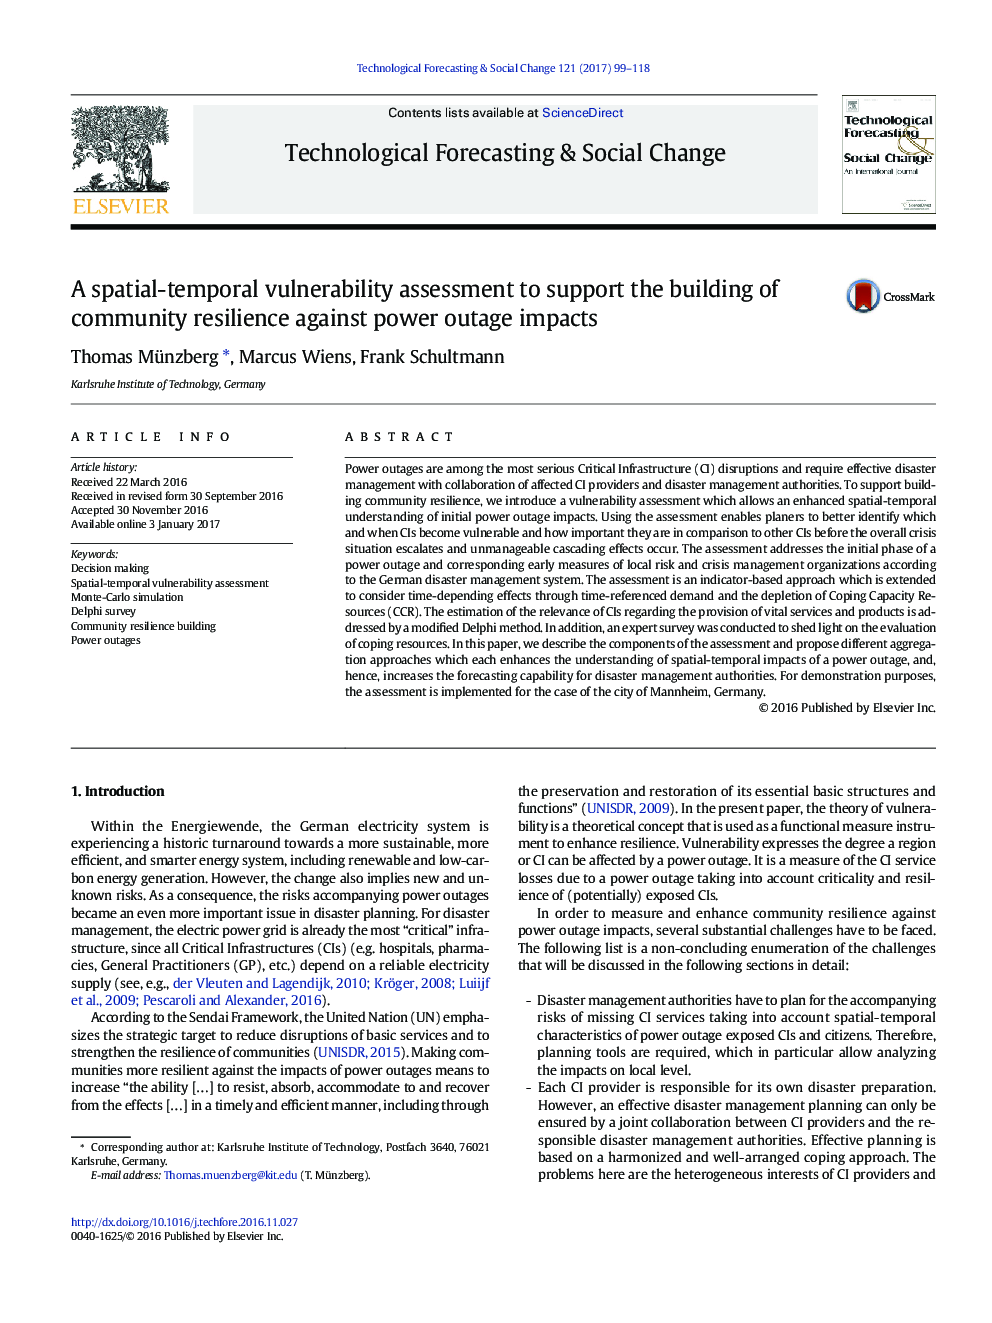 A spatial-temporal vulnerability assessment to support the building of community resilience against power outage impacts